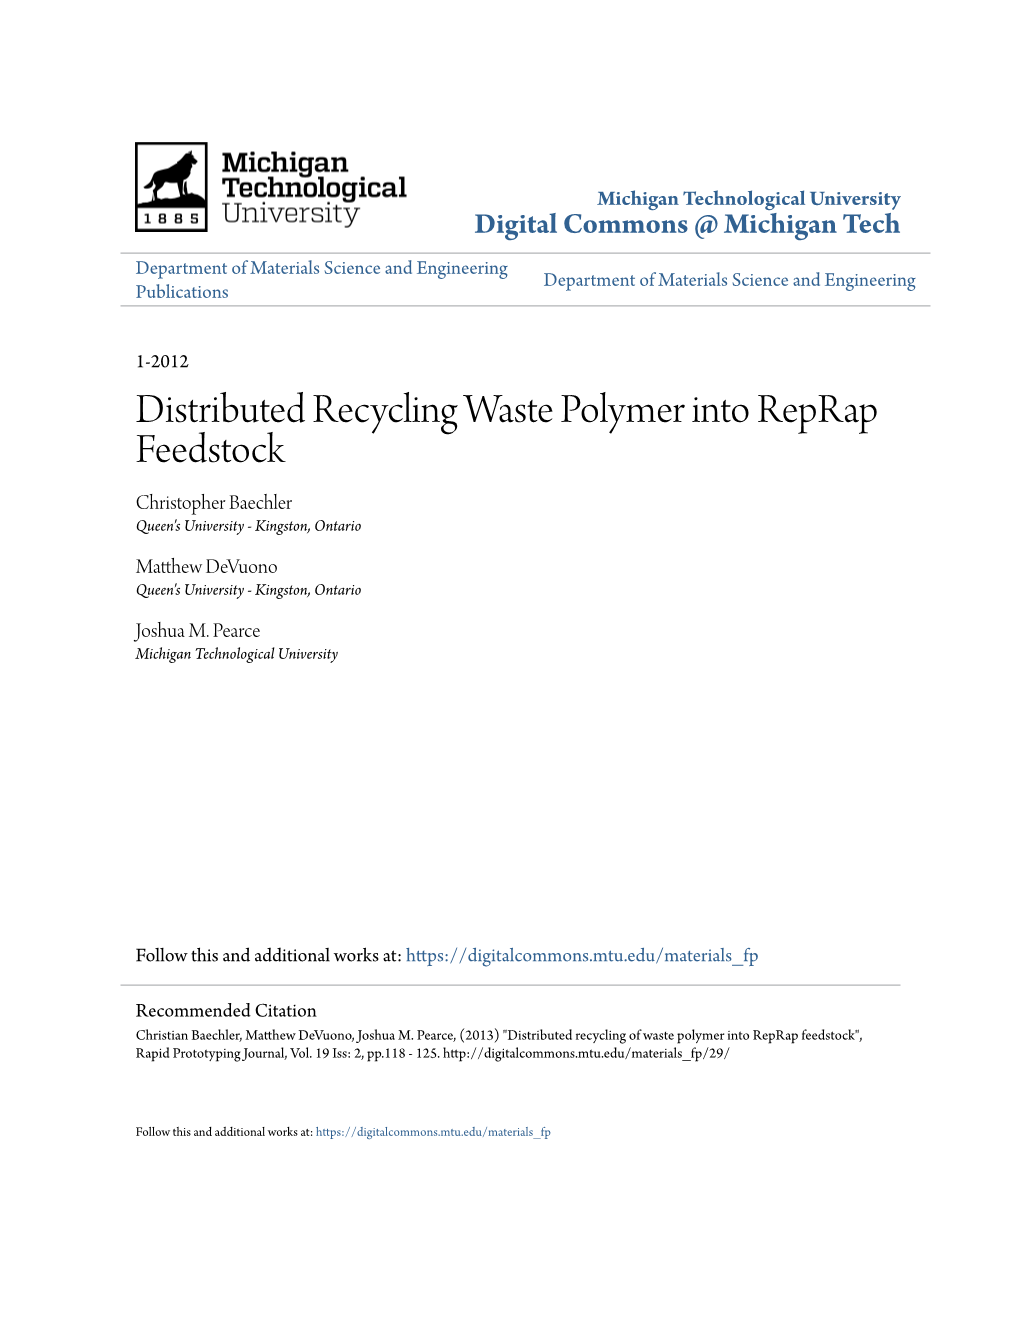 Distributed Recycling Waste Polymer Into Reprap Feedstock Christopher Baechler Queen's University - Kingston, Ontario